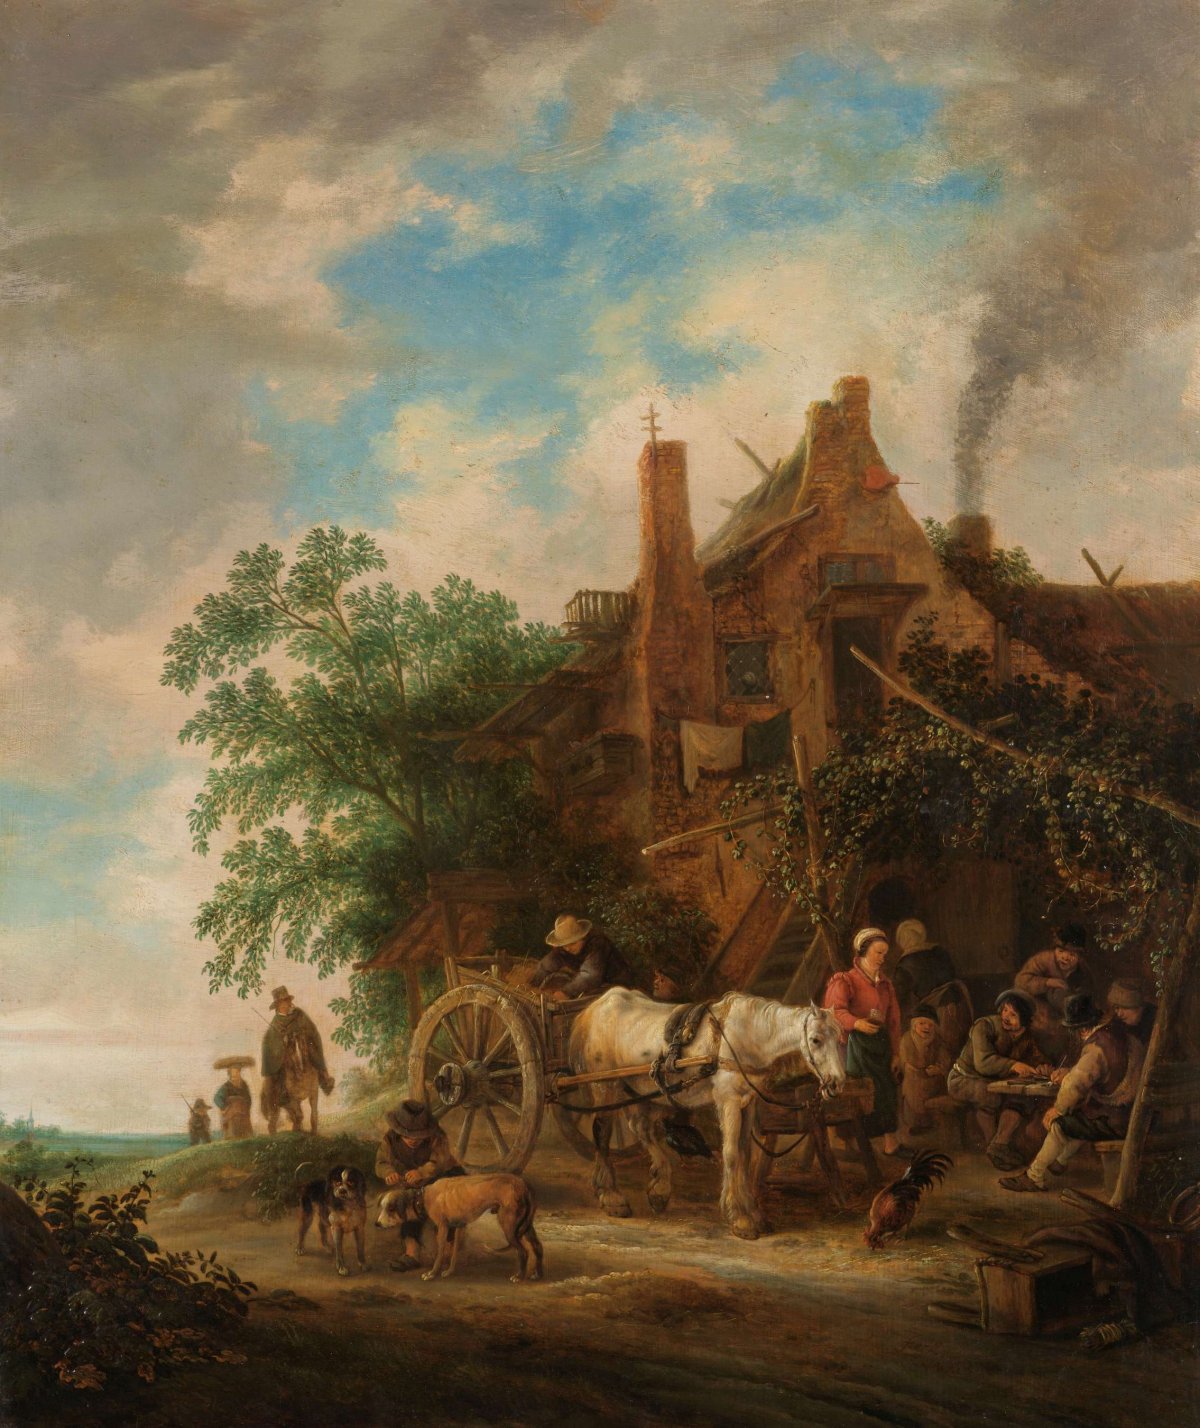 Country inn with horse and wagon, Isaac van Ostade, 1640 - 1649